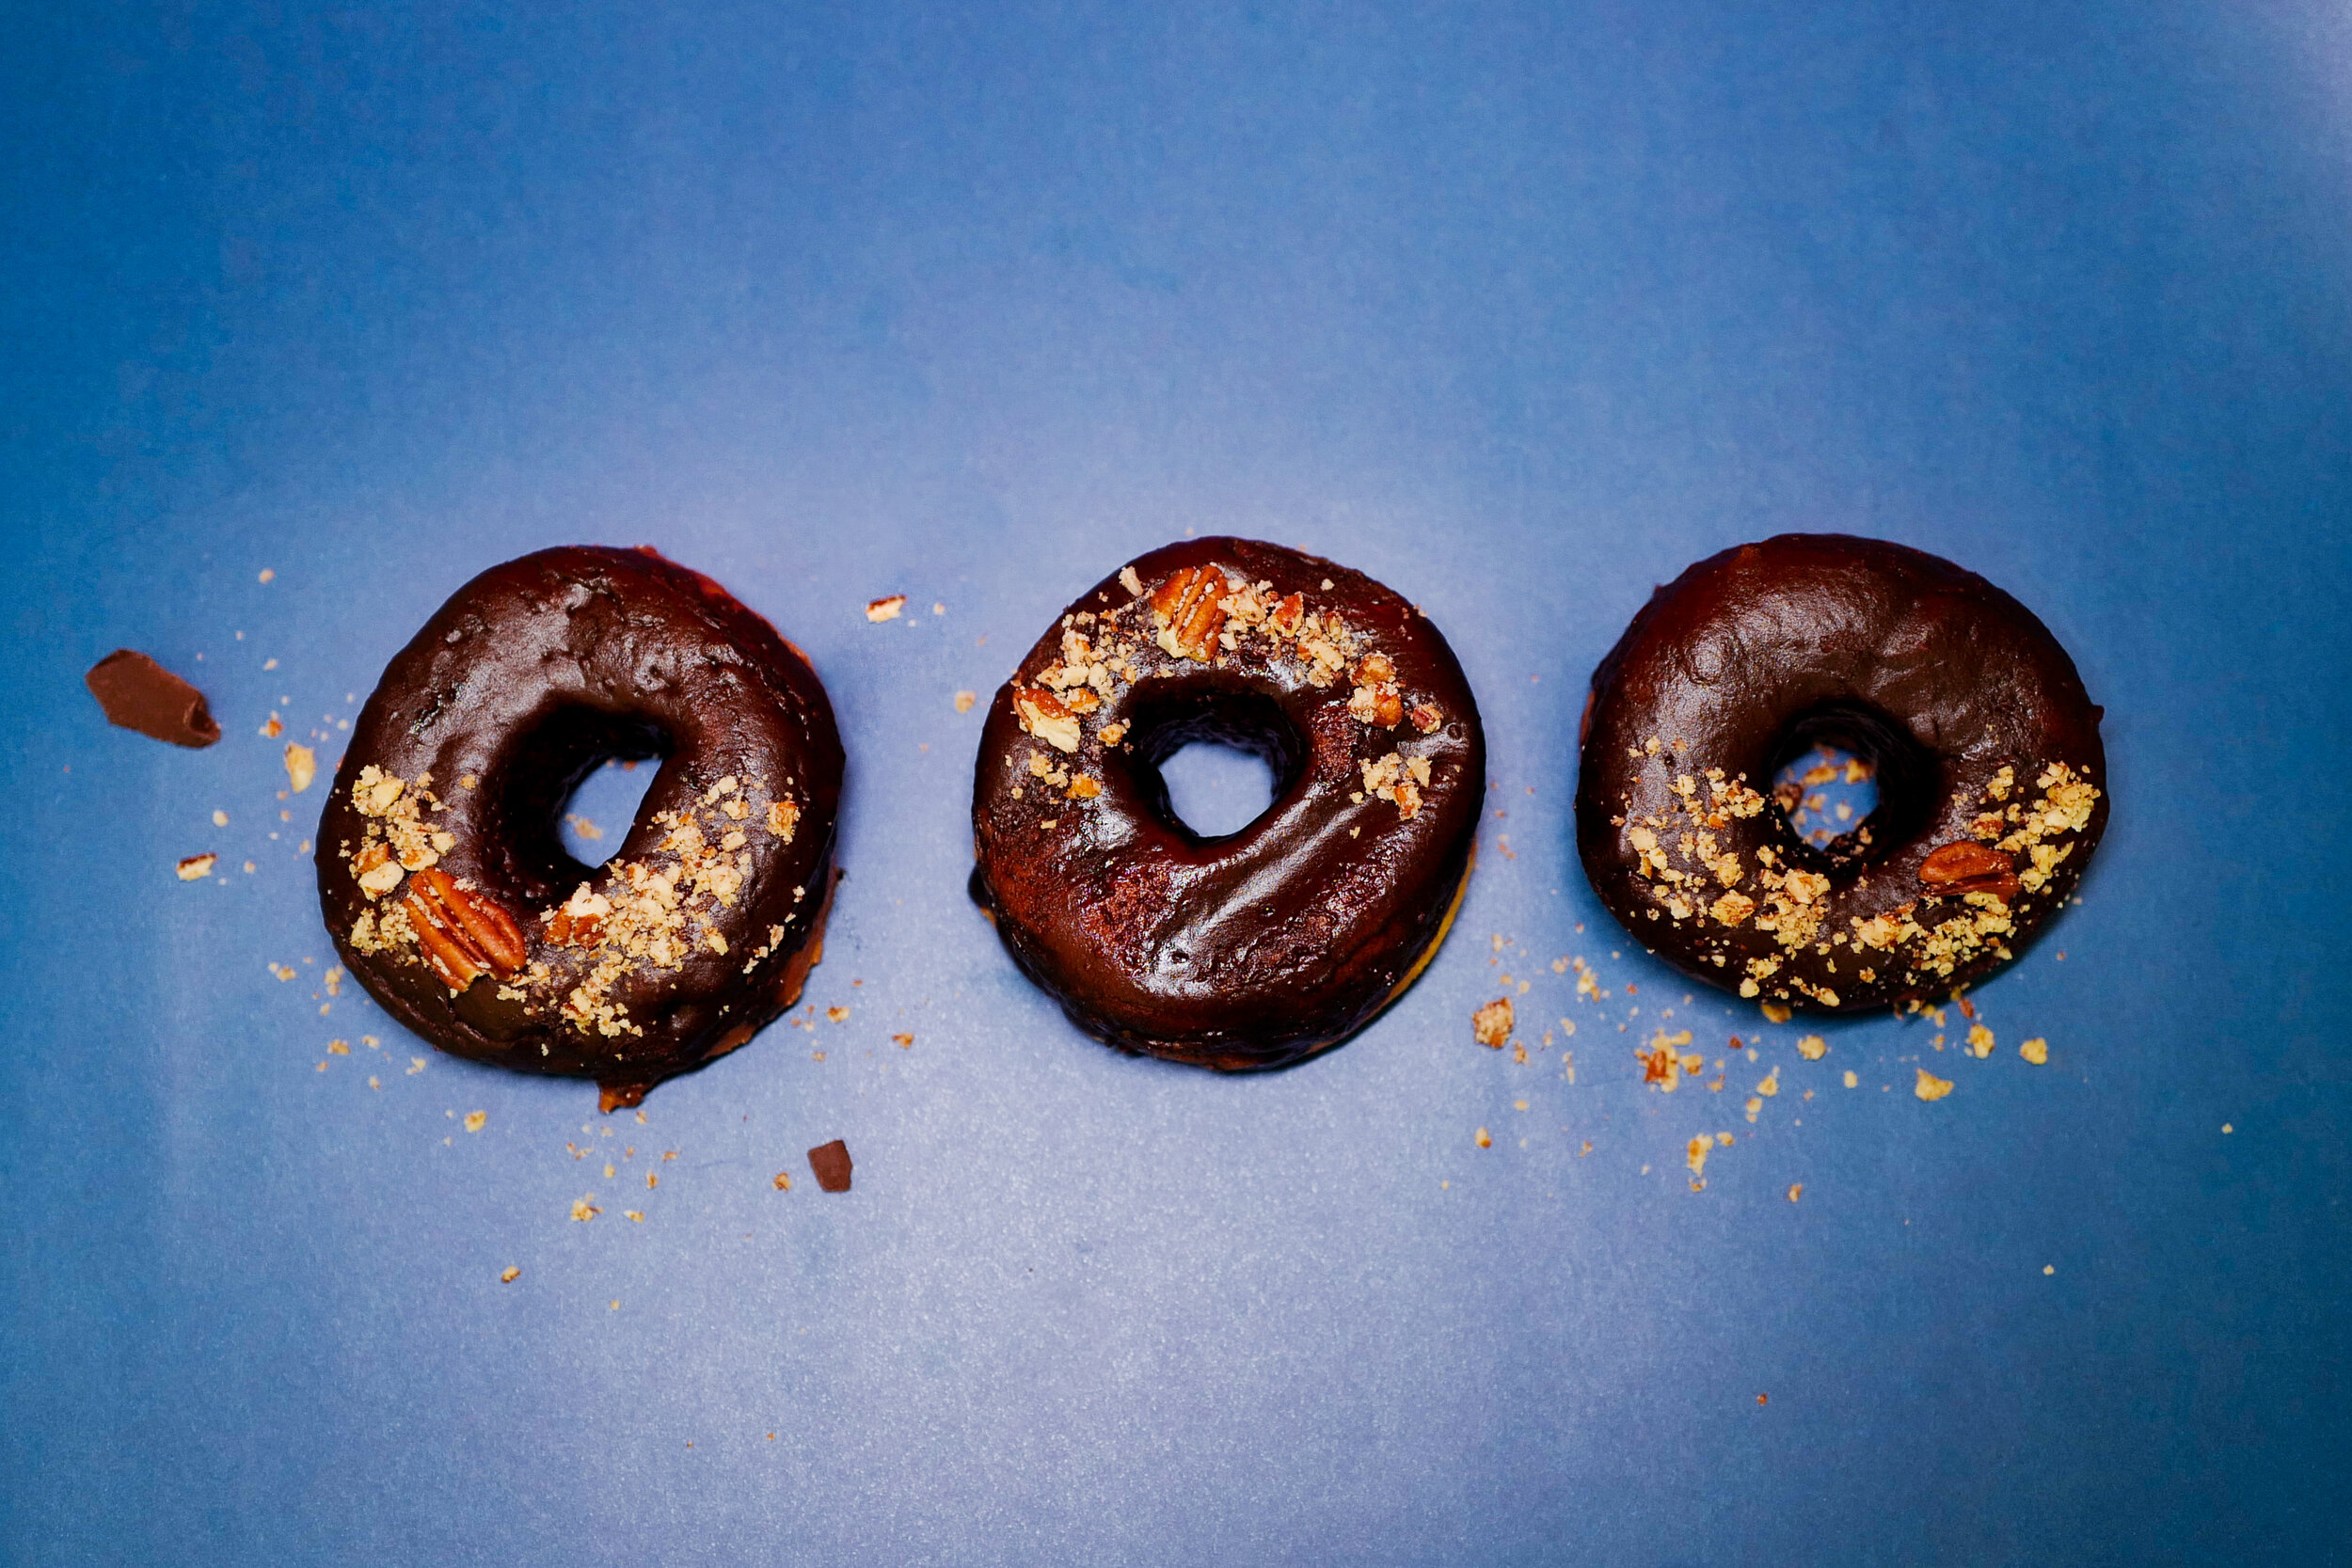 Classic Glazed Doughnuts Recipe - NYT Cooking